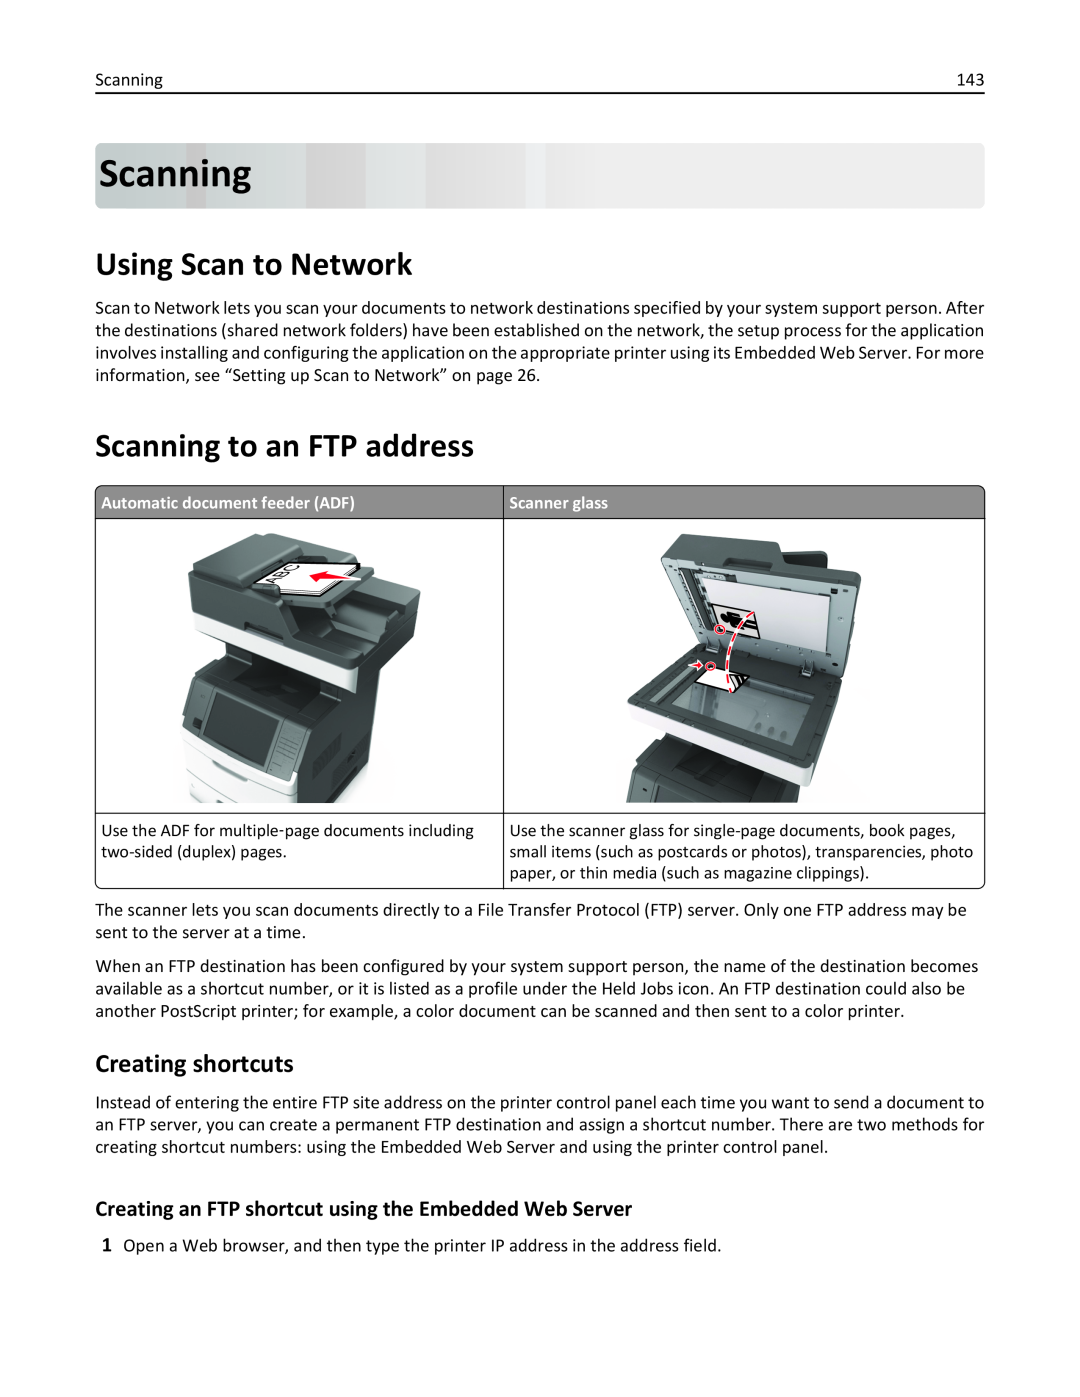 Lexmark 237, MX710DHE, 24T7310, 037 manual Using Scan to Network, Scanning to an FTP address, Creating shortcuts 